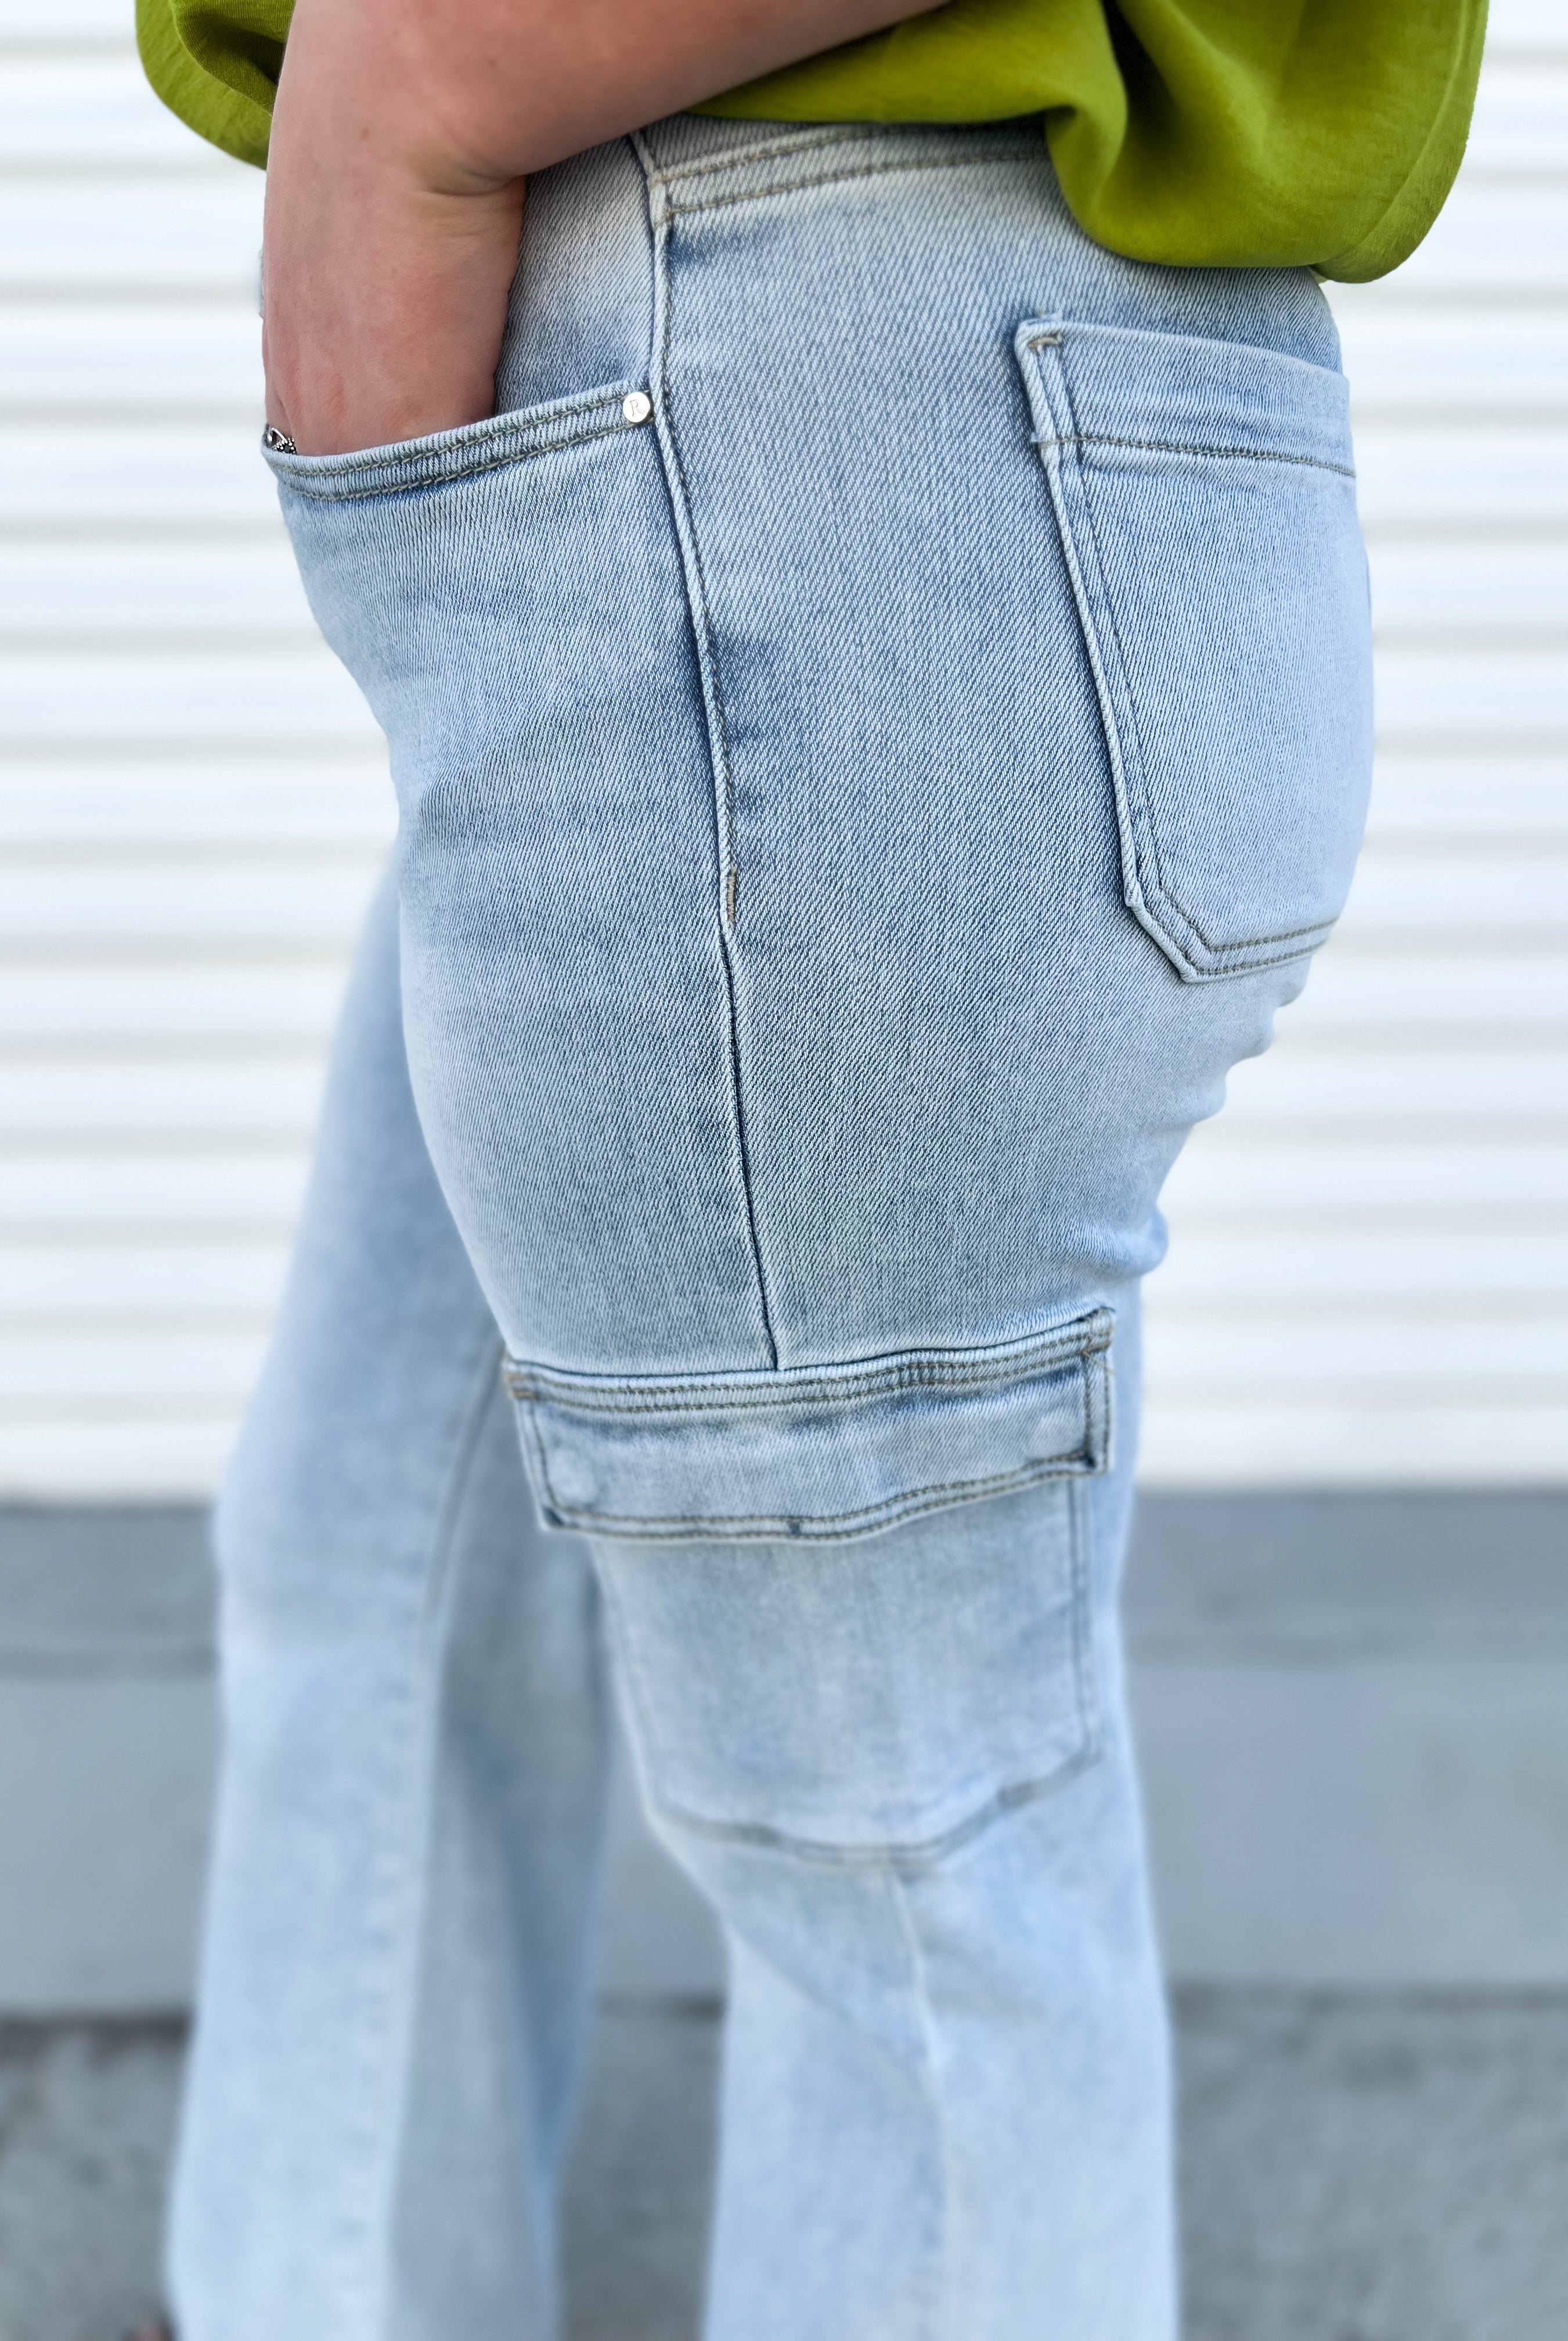 Ready or Not Cargo Jeans by Risen-190 Jeans-Risen Jeans-Heathered Boho Boutique, Women's Fashion and Accessories in Palmetto, FL